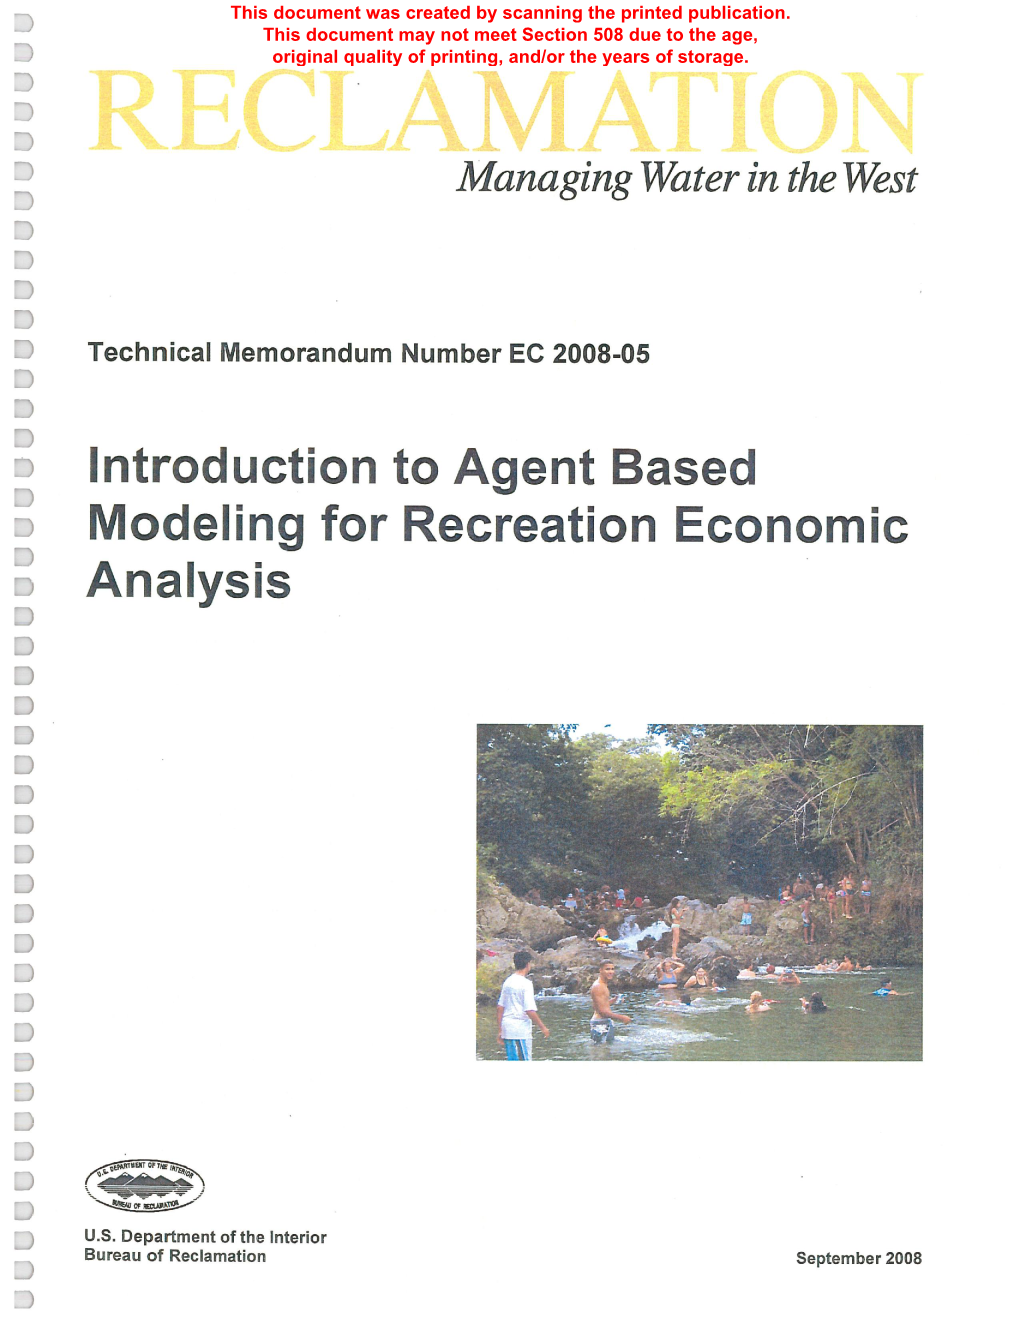 Introduction to Agent Based Modeling for Recreation Economic Analysis